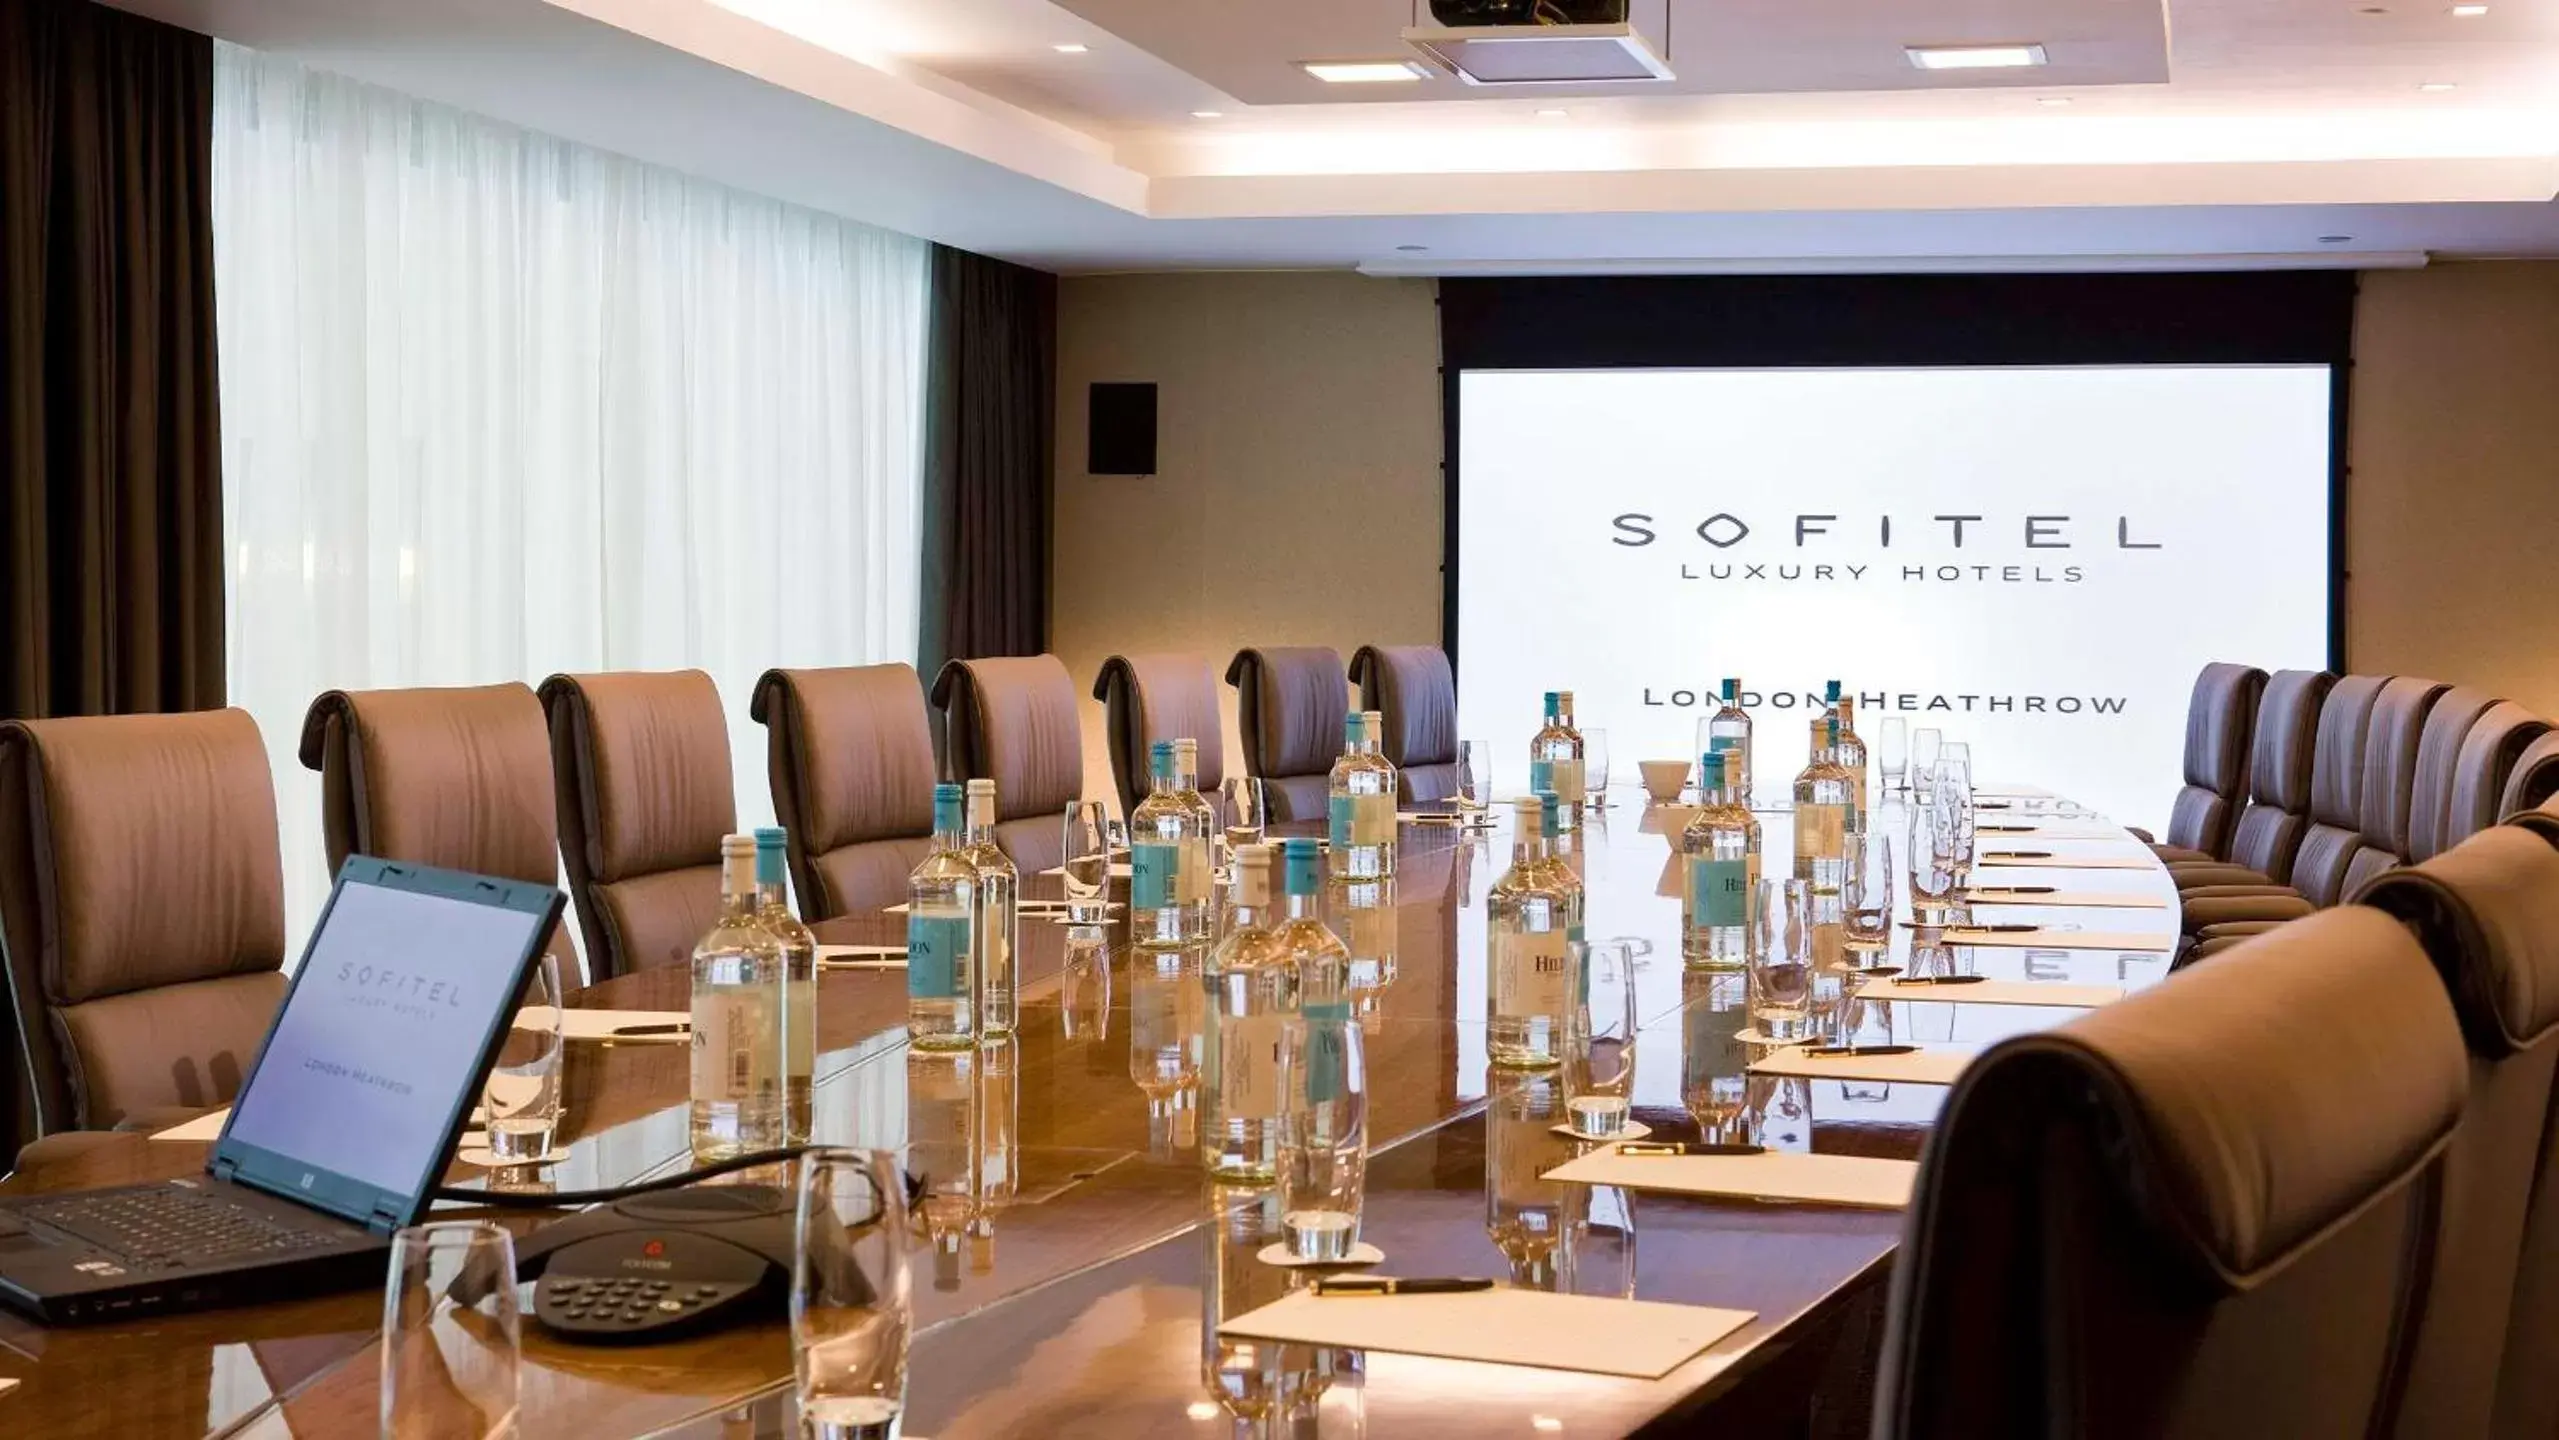 Meeting/conference room, Business Area/Conference Room in Sofitel London Heathrow